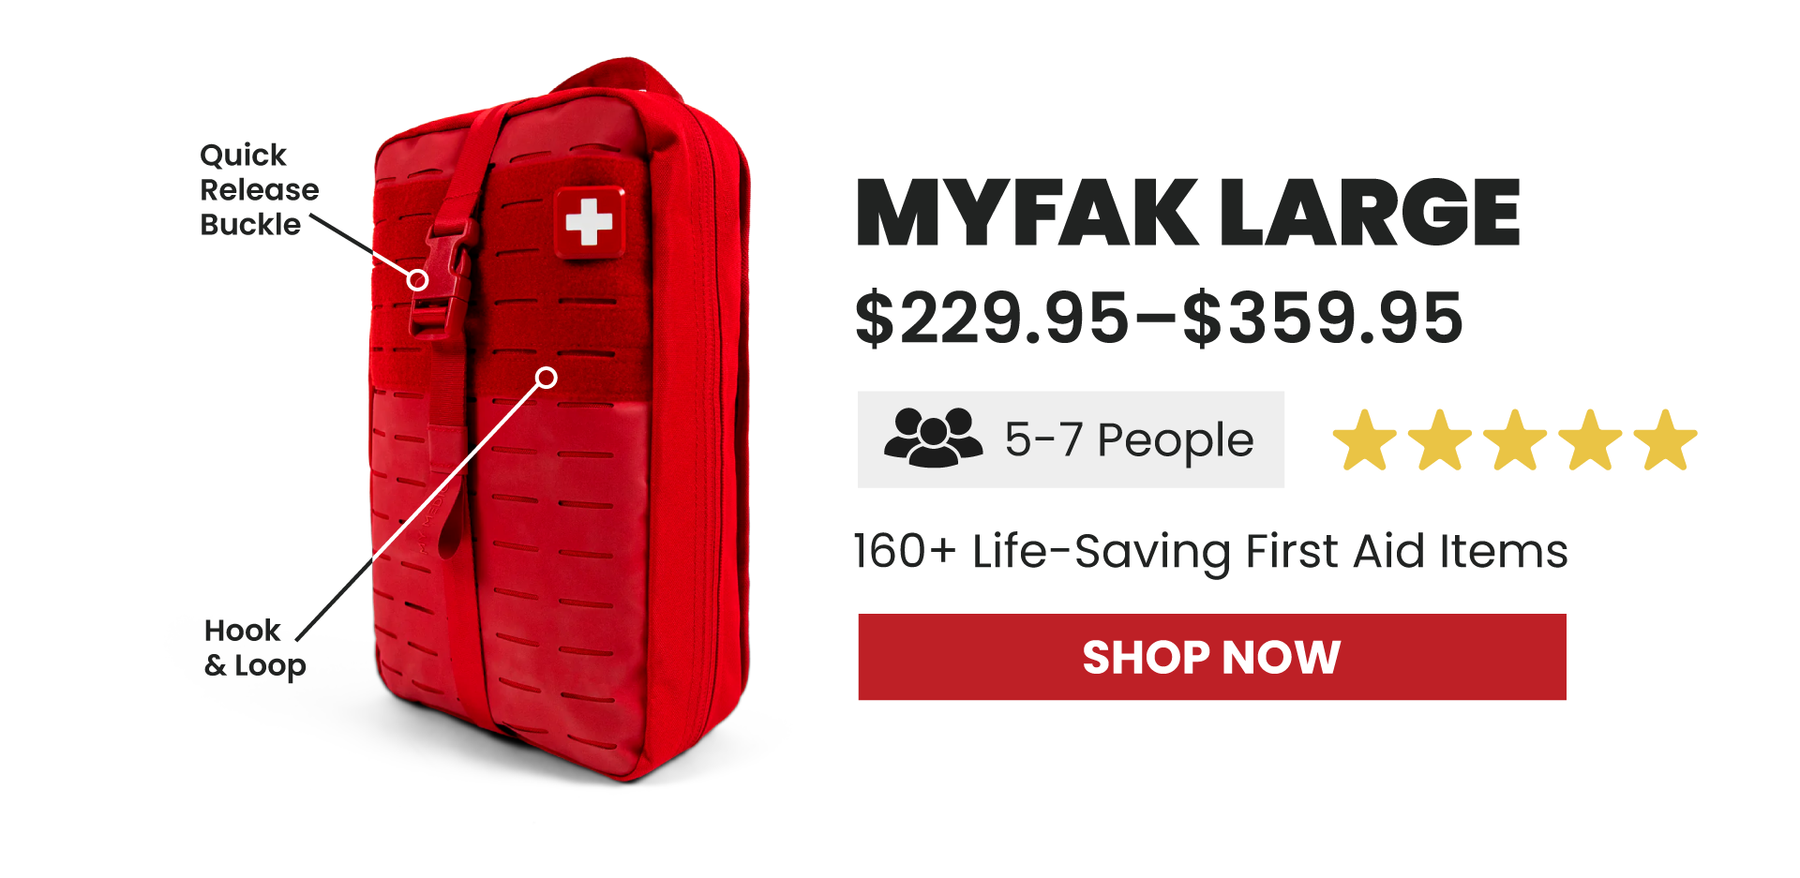 MyFAK Large, $229.95-$359.95, 5-7 People, 160+ Life-Saving First Aid Items, Shop Now